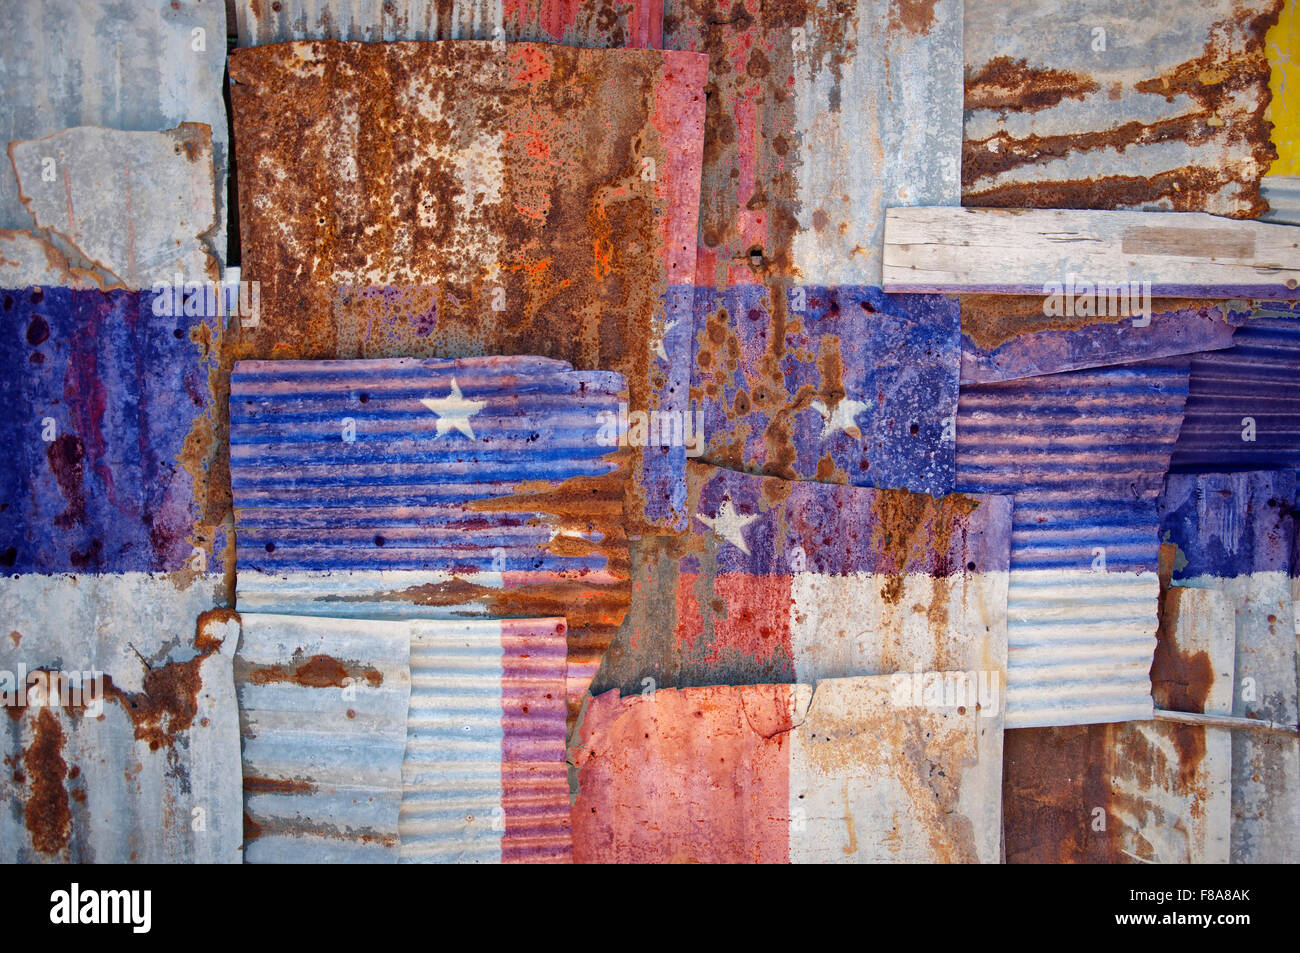 An abstract background image of the flag of Netherlands Antilles painted on to rusty corrugated iron sheets overlapping to form Stock Photo